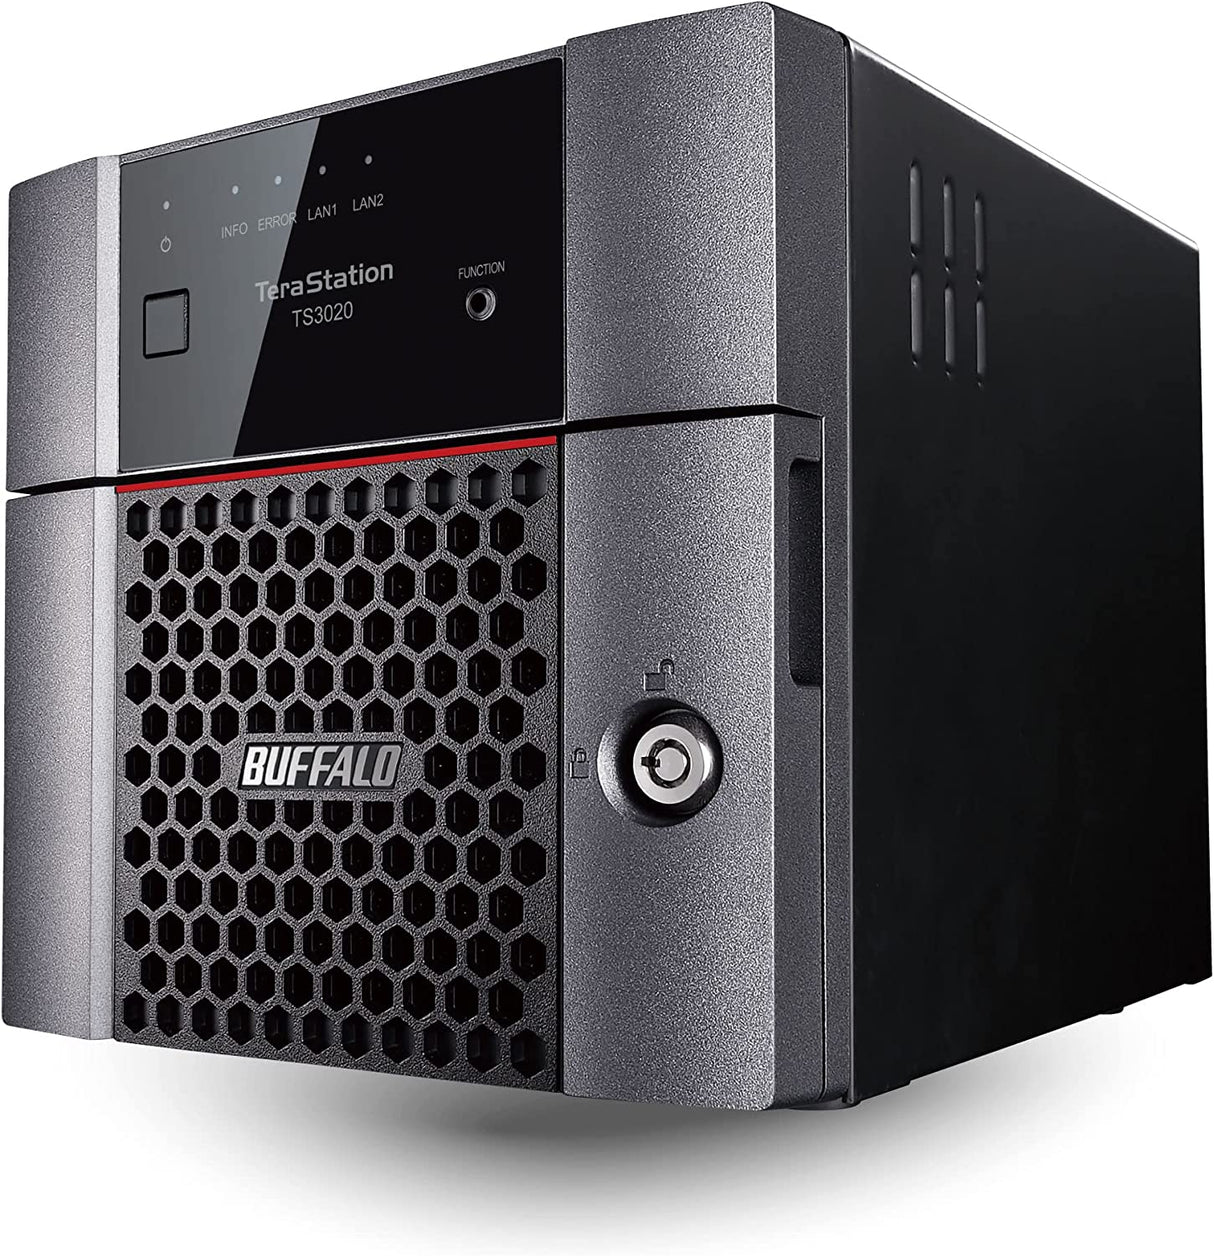 BUFFALO TeraStation 3220DN 2-Bay Desktop NAS 4TB (2x2TB) with HDD NAS Hard Drives Included 2.5GBE / Computer Network Attached Storage/Private Cloud/NAS Storage/Network Storage/File Server 4 TB TeraStation 3220DN Desktop NAS - 2 Drive Bays